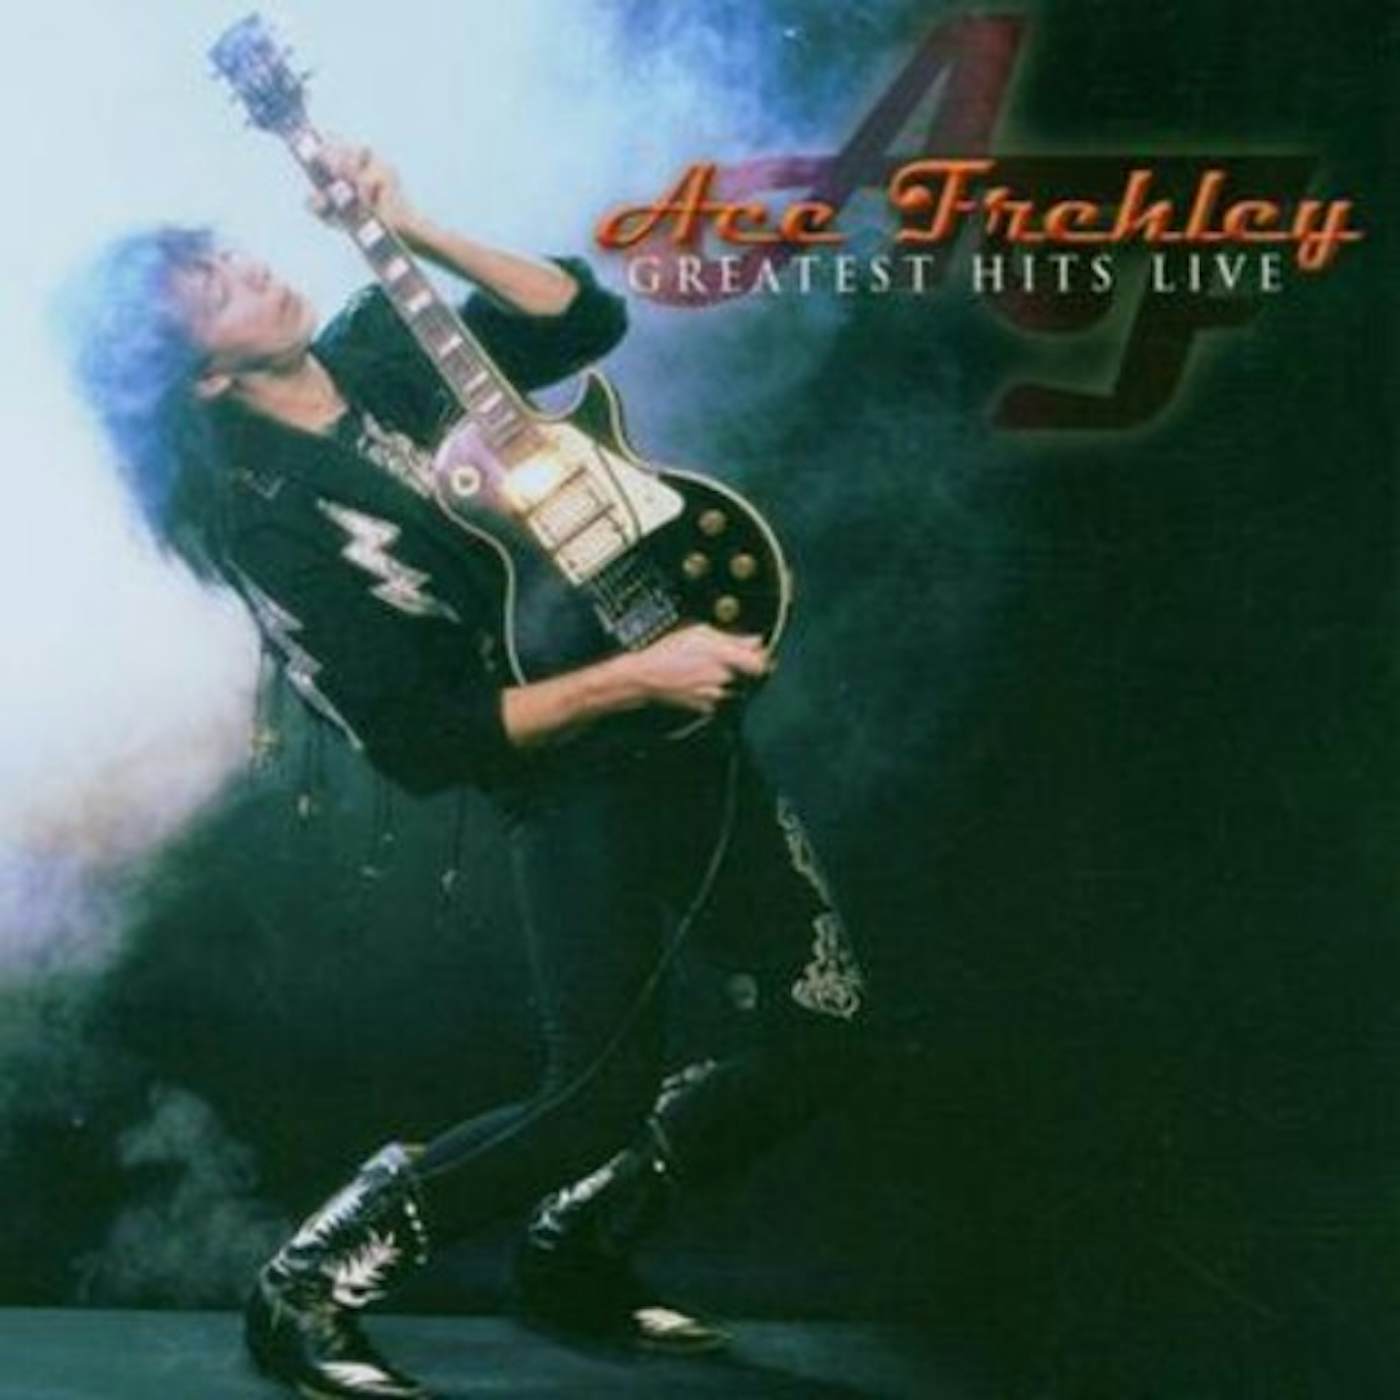 Ace Frehley Greatest Hits Live Vinyl Record